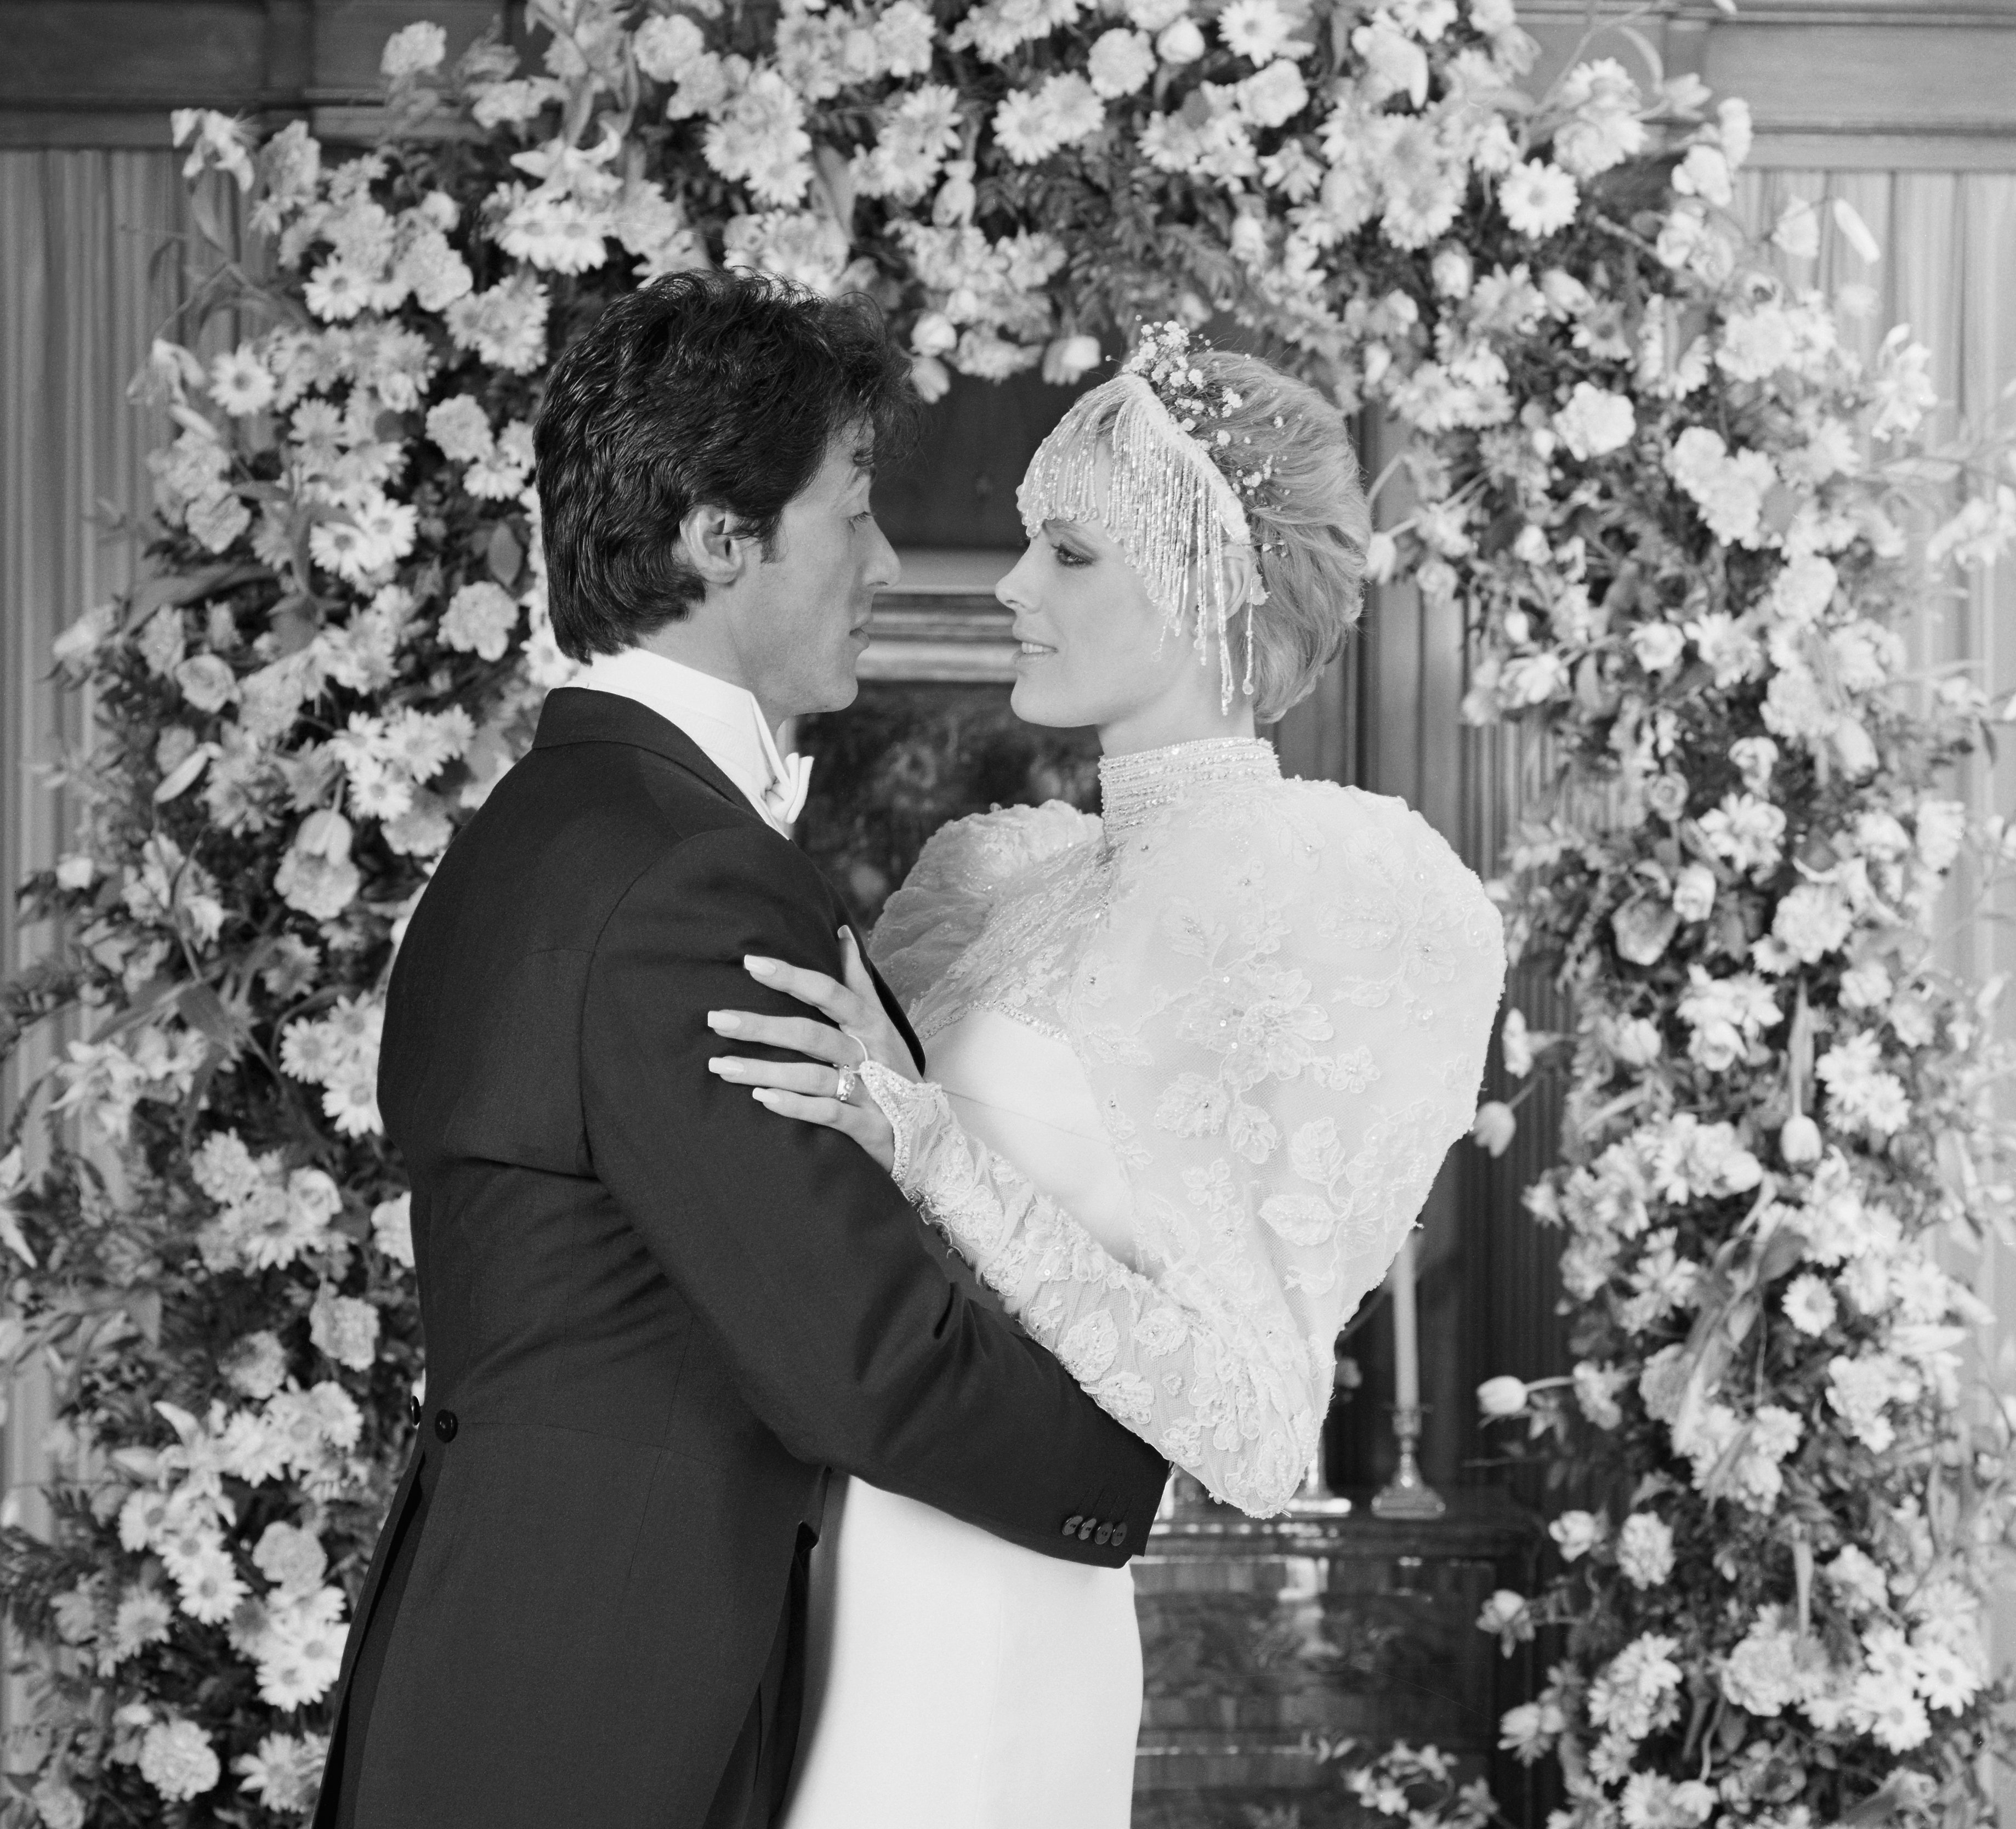 Sylvester Stallone and Brigitte Nielsen photographed after their wedding ceremony at Irwin Winkler's home on December 16, 1985. | Source: Getty Images